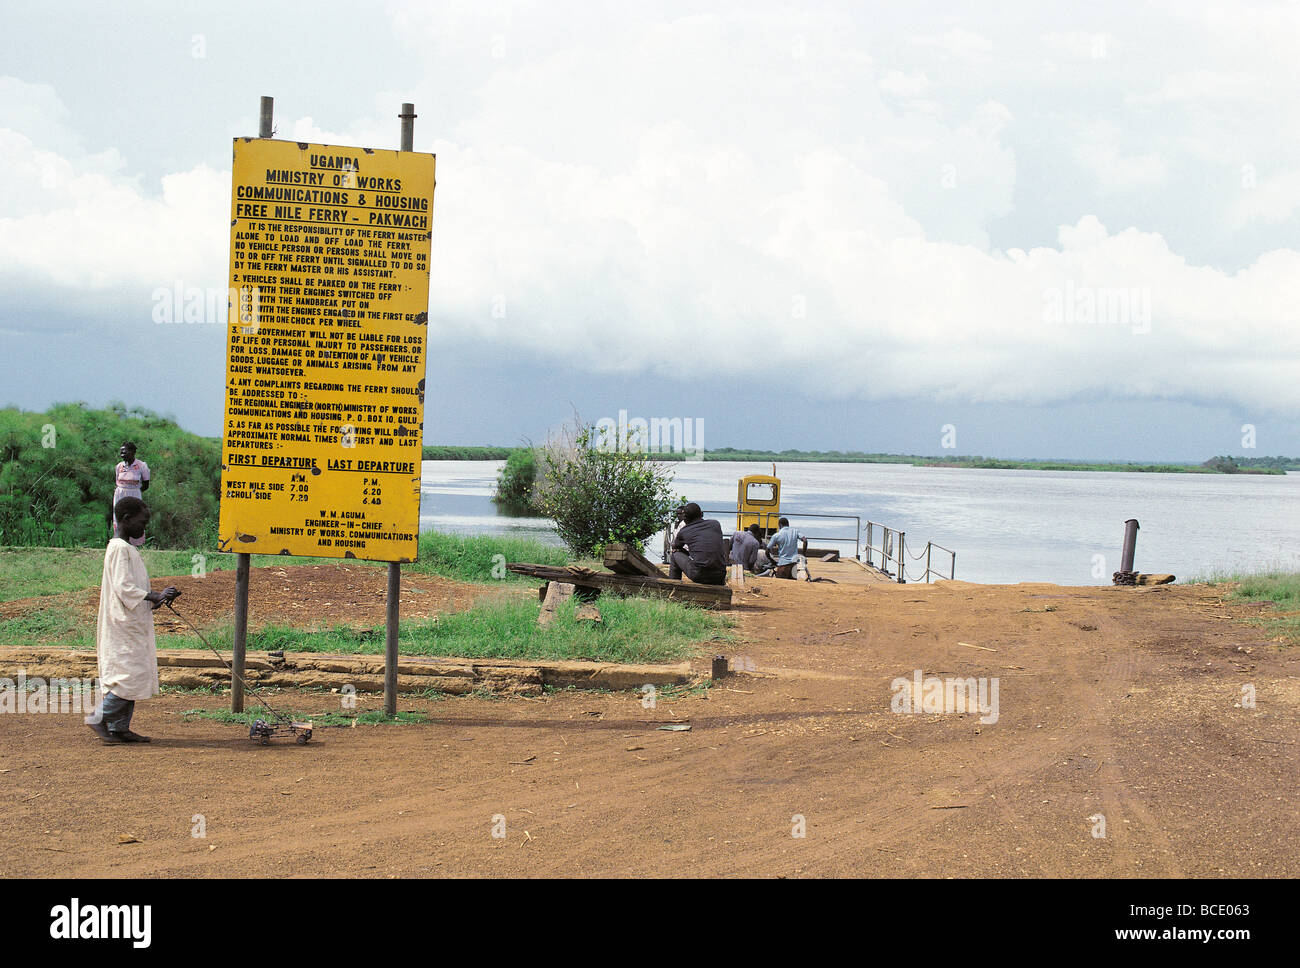 The Pakwach free vehicle ferry on River Nile at Port Masindi Uganda East Africa with Ministry of Works Notice board Stock Photo